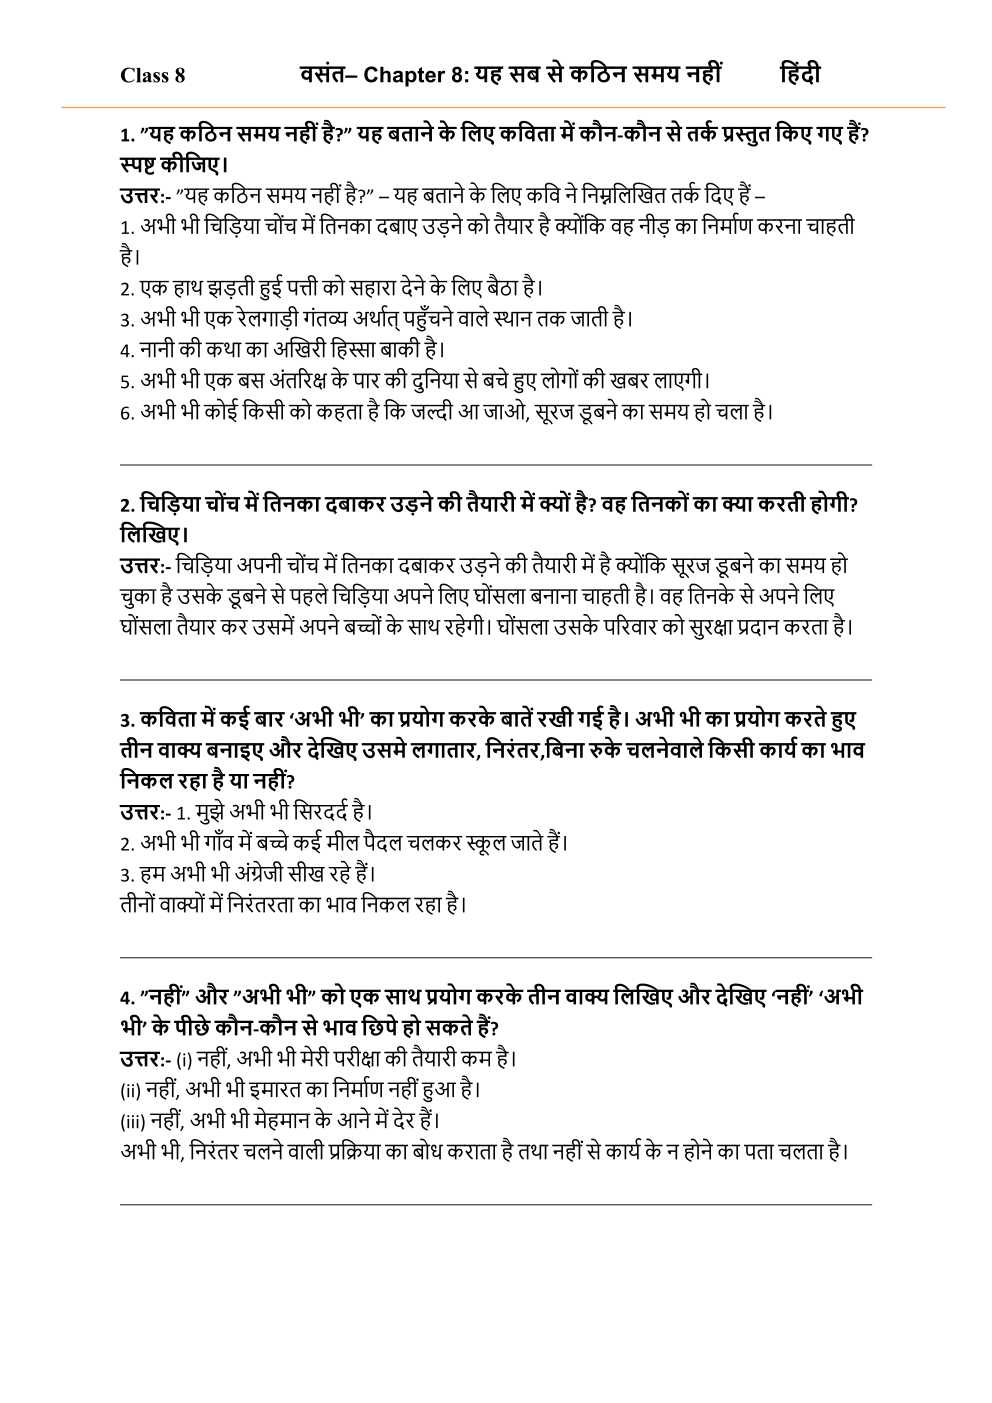 NCERT Solutions For Class 8 Hindi Vasant Chapter 8